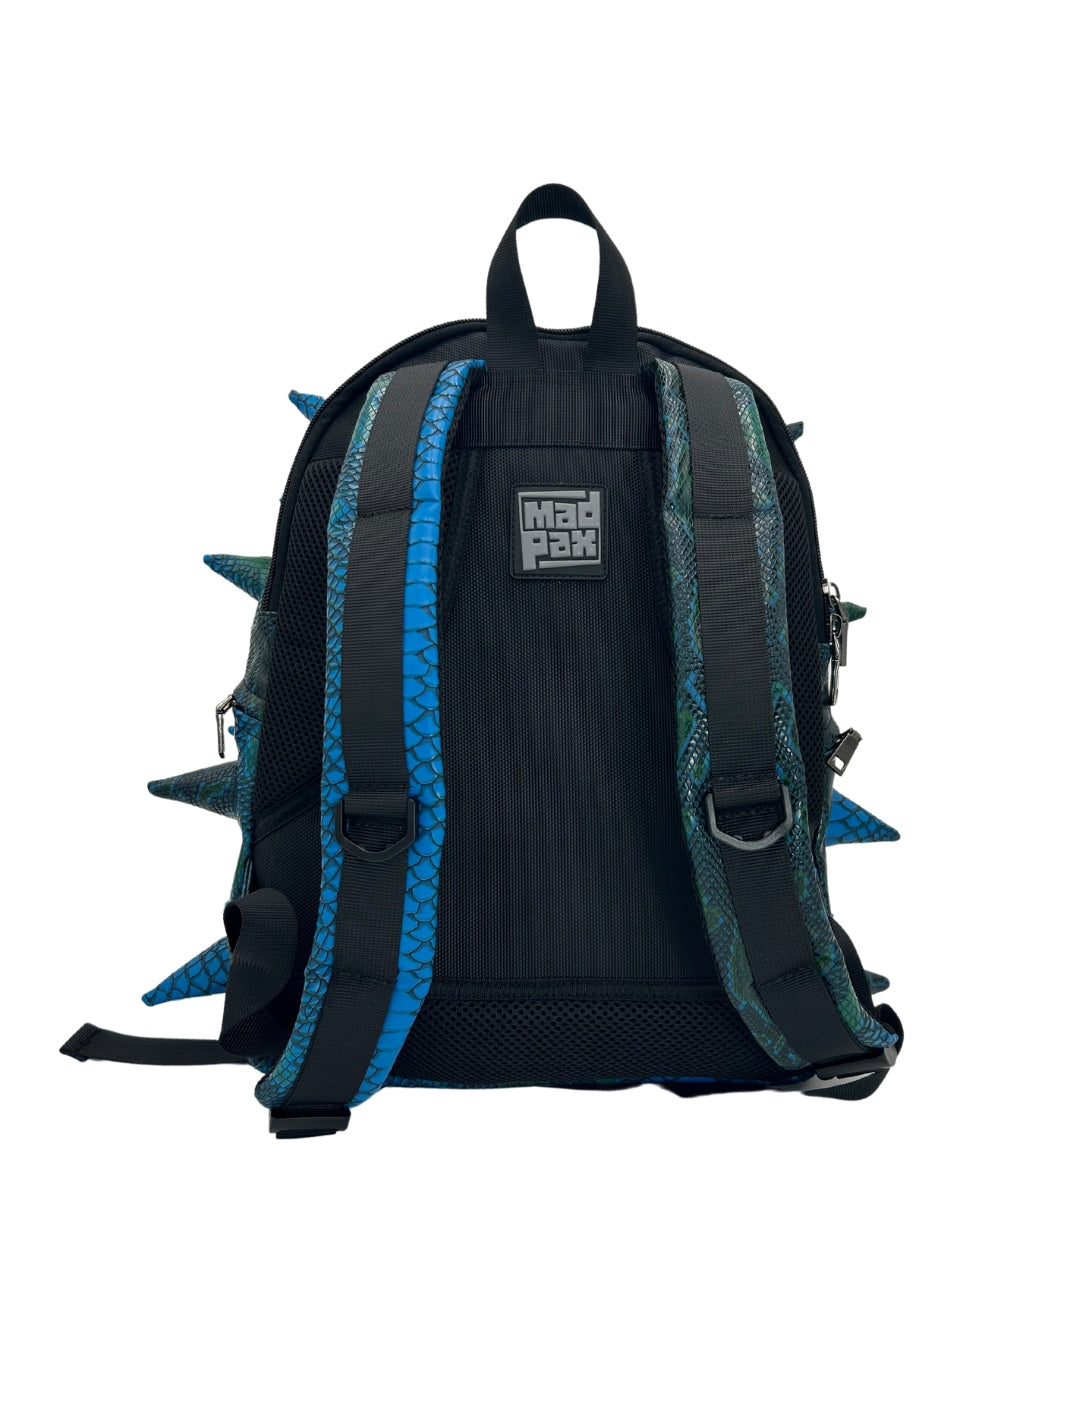 Dinosaur Spike Daypack by Madpax Back View